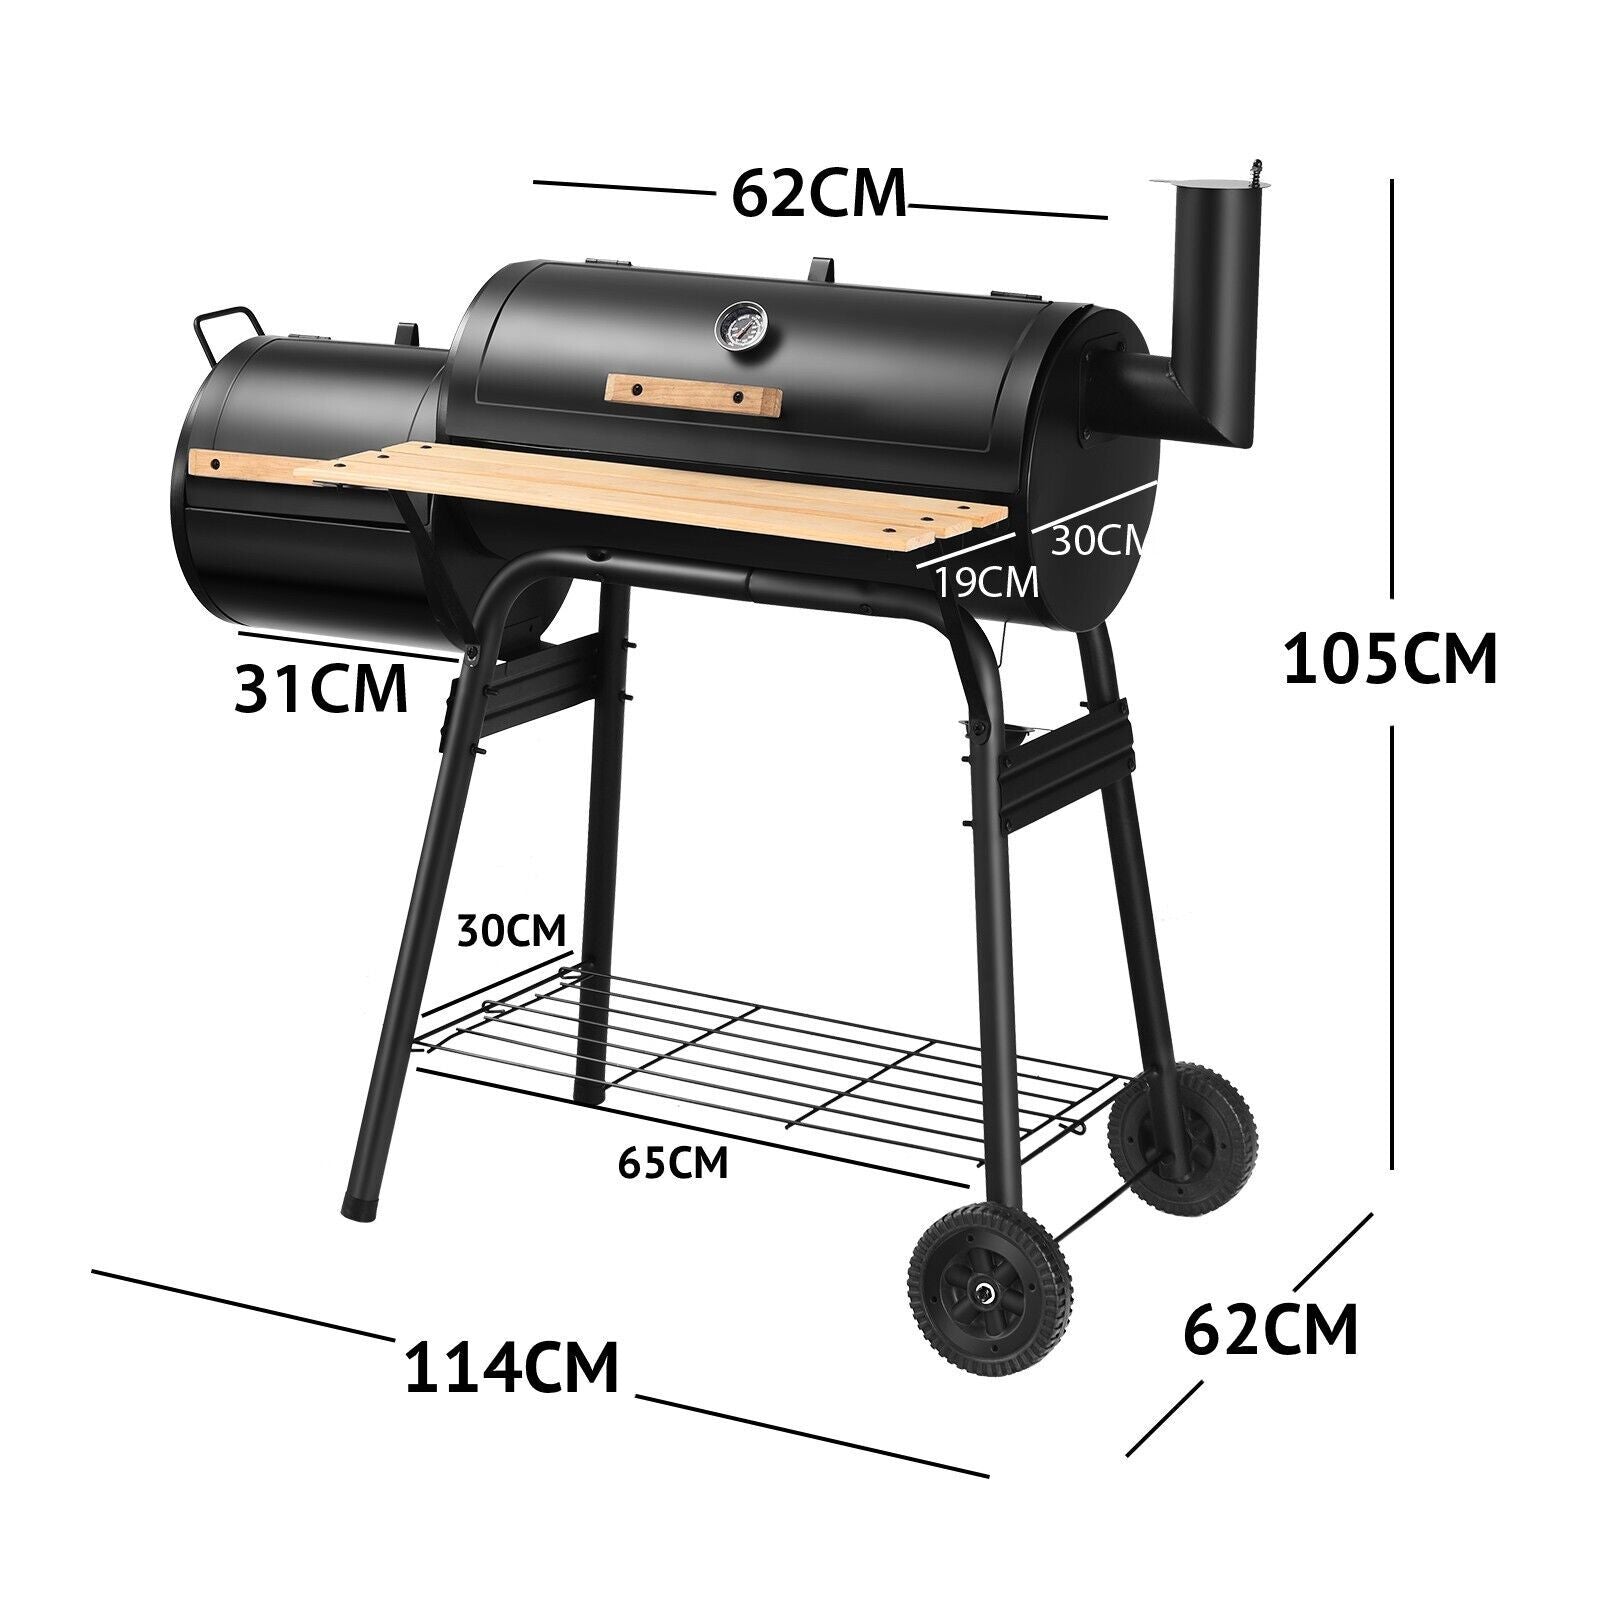 Charcoal BBQ Grill with Wheels and Shelves for Camping Picnic Party